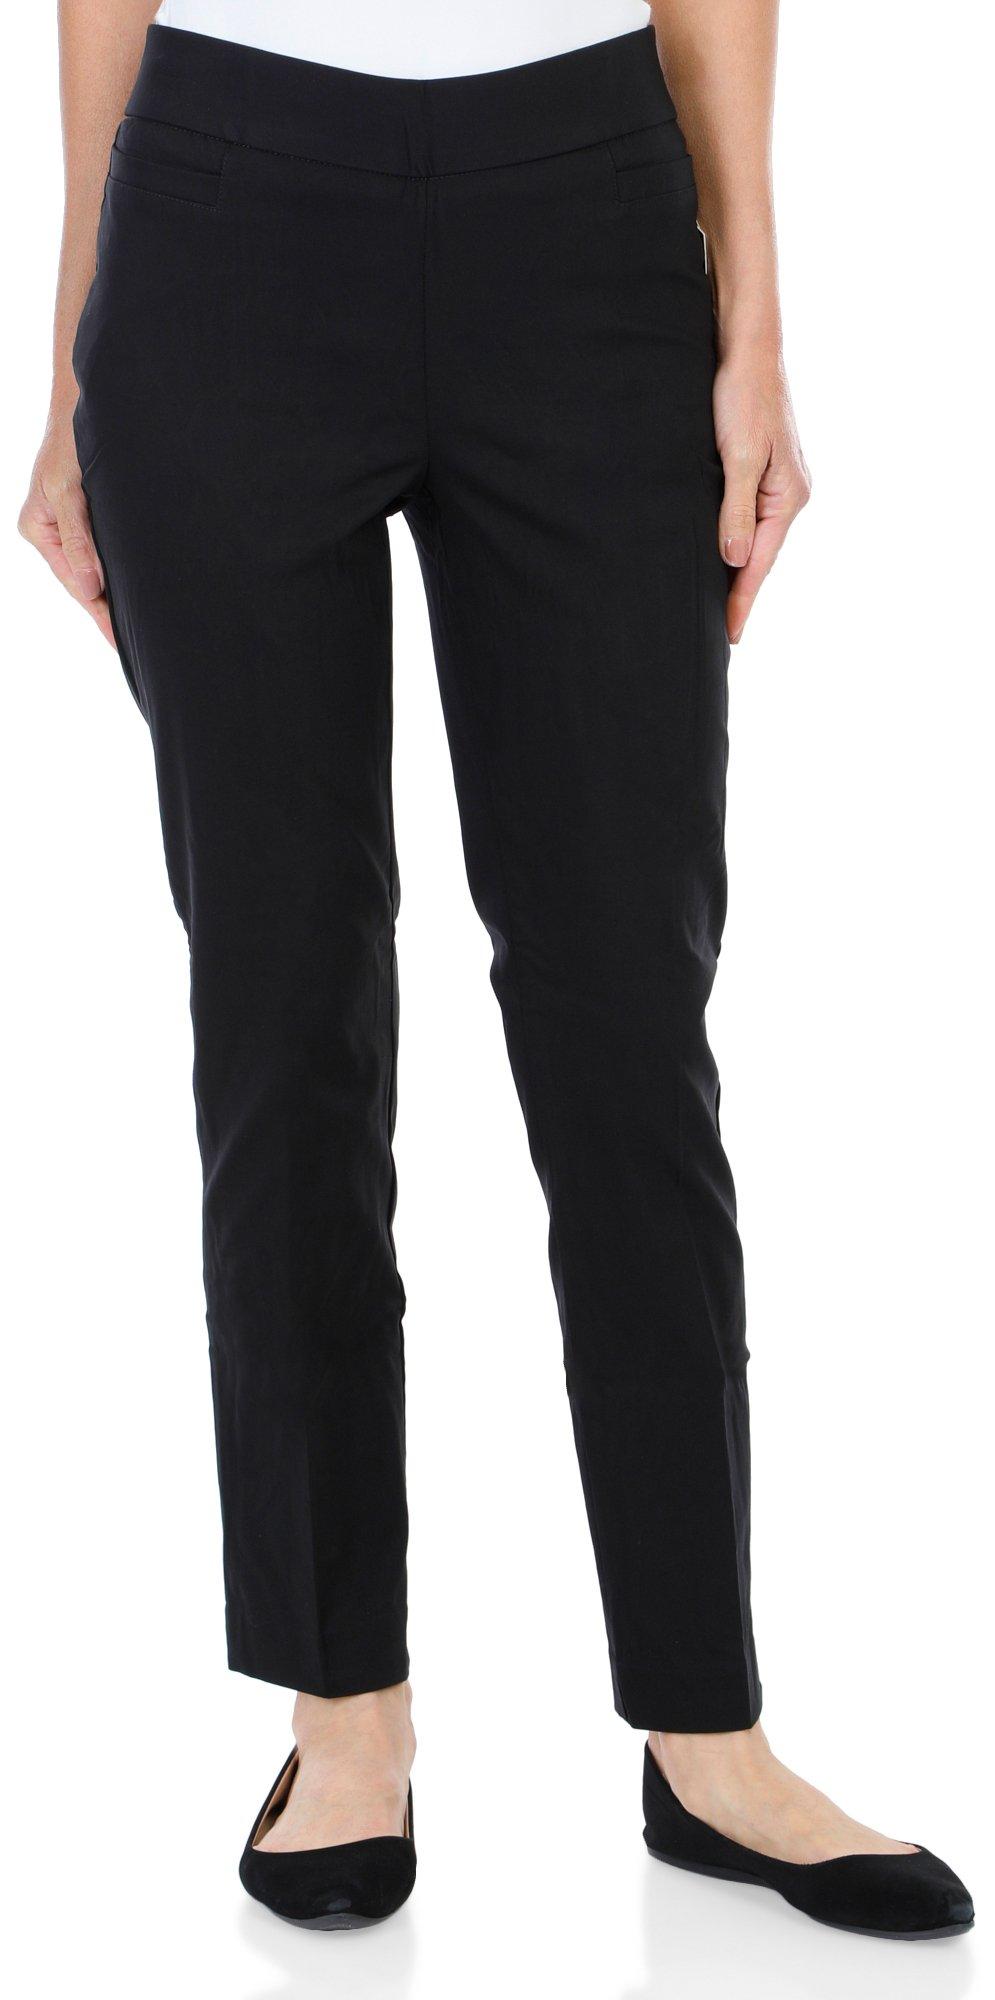 Women's Petite Solid Pull On Pants